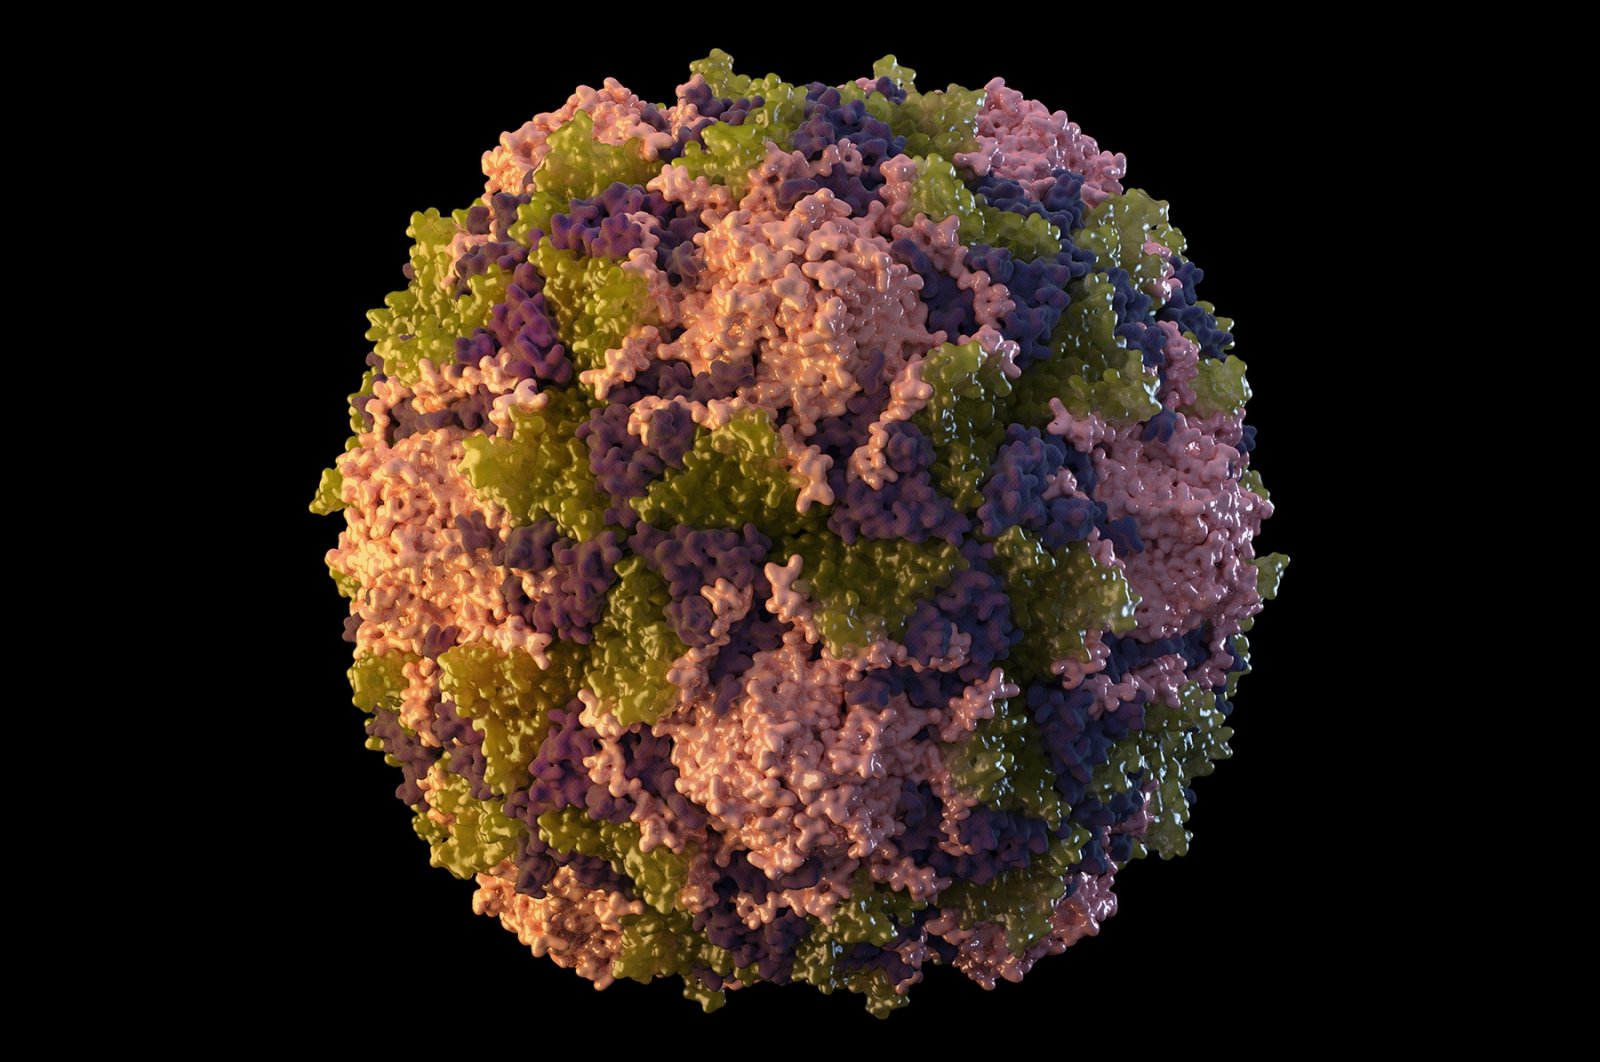 This 2014 illustration made available by the U.S. Centers for Disease Control and Prevention depicts a polio virus particle. (AP Photo)